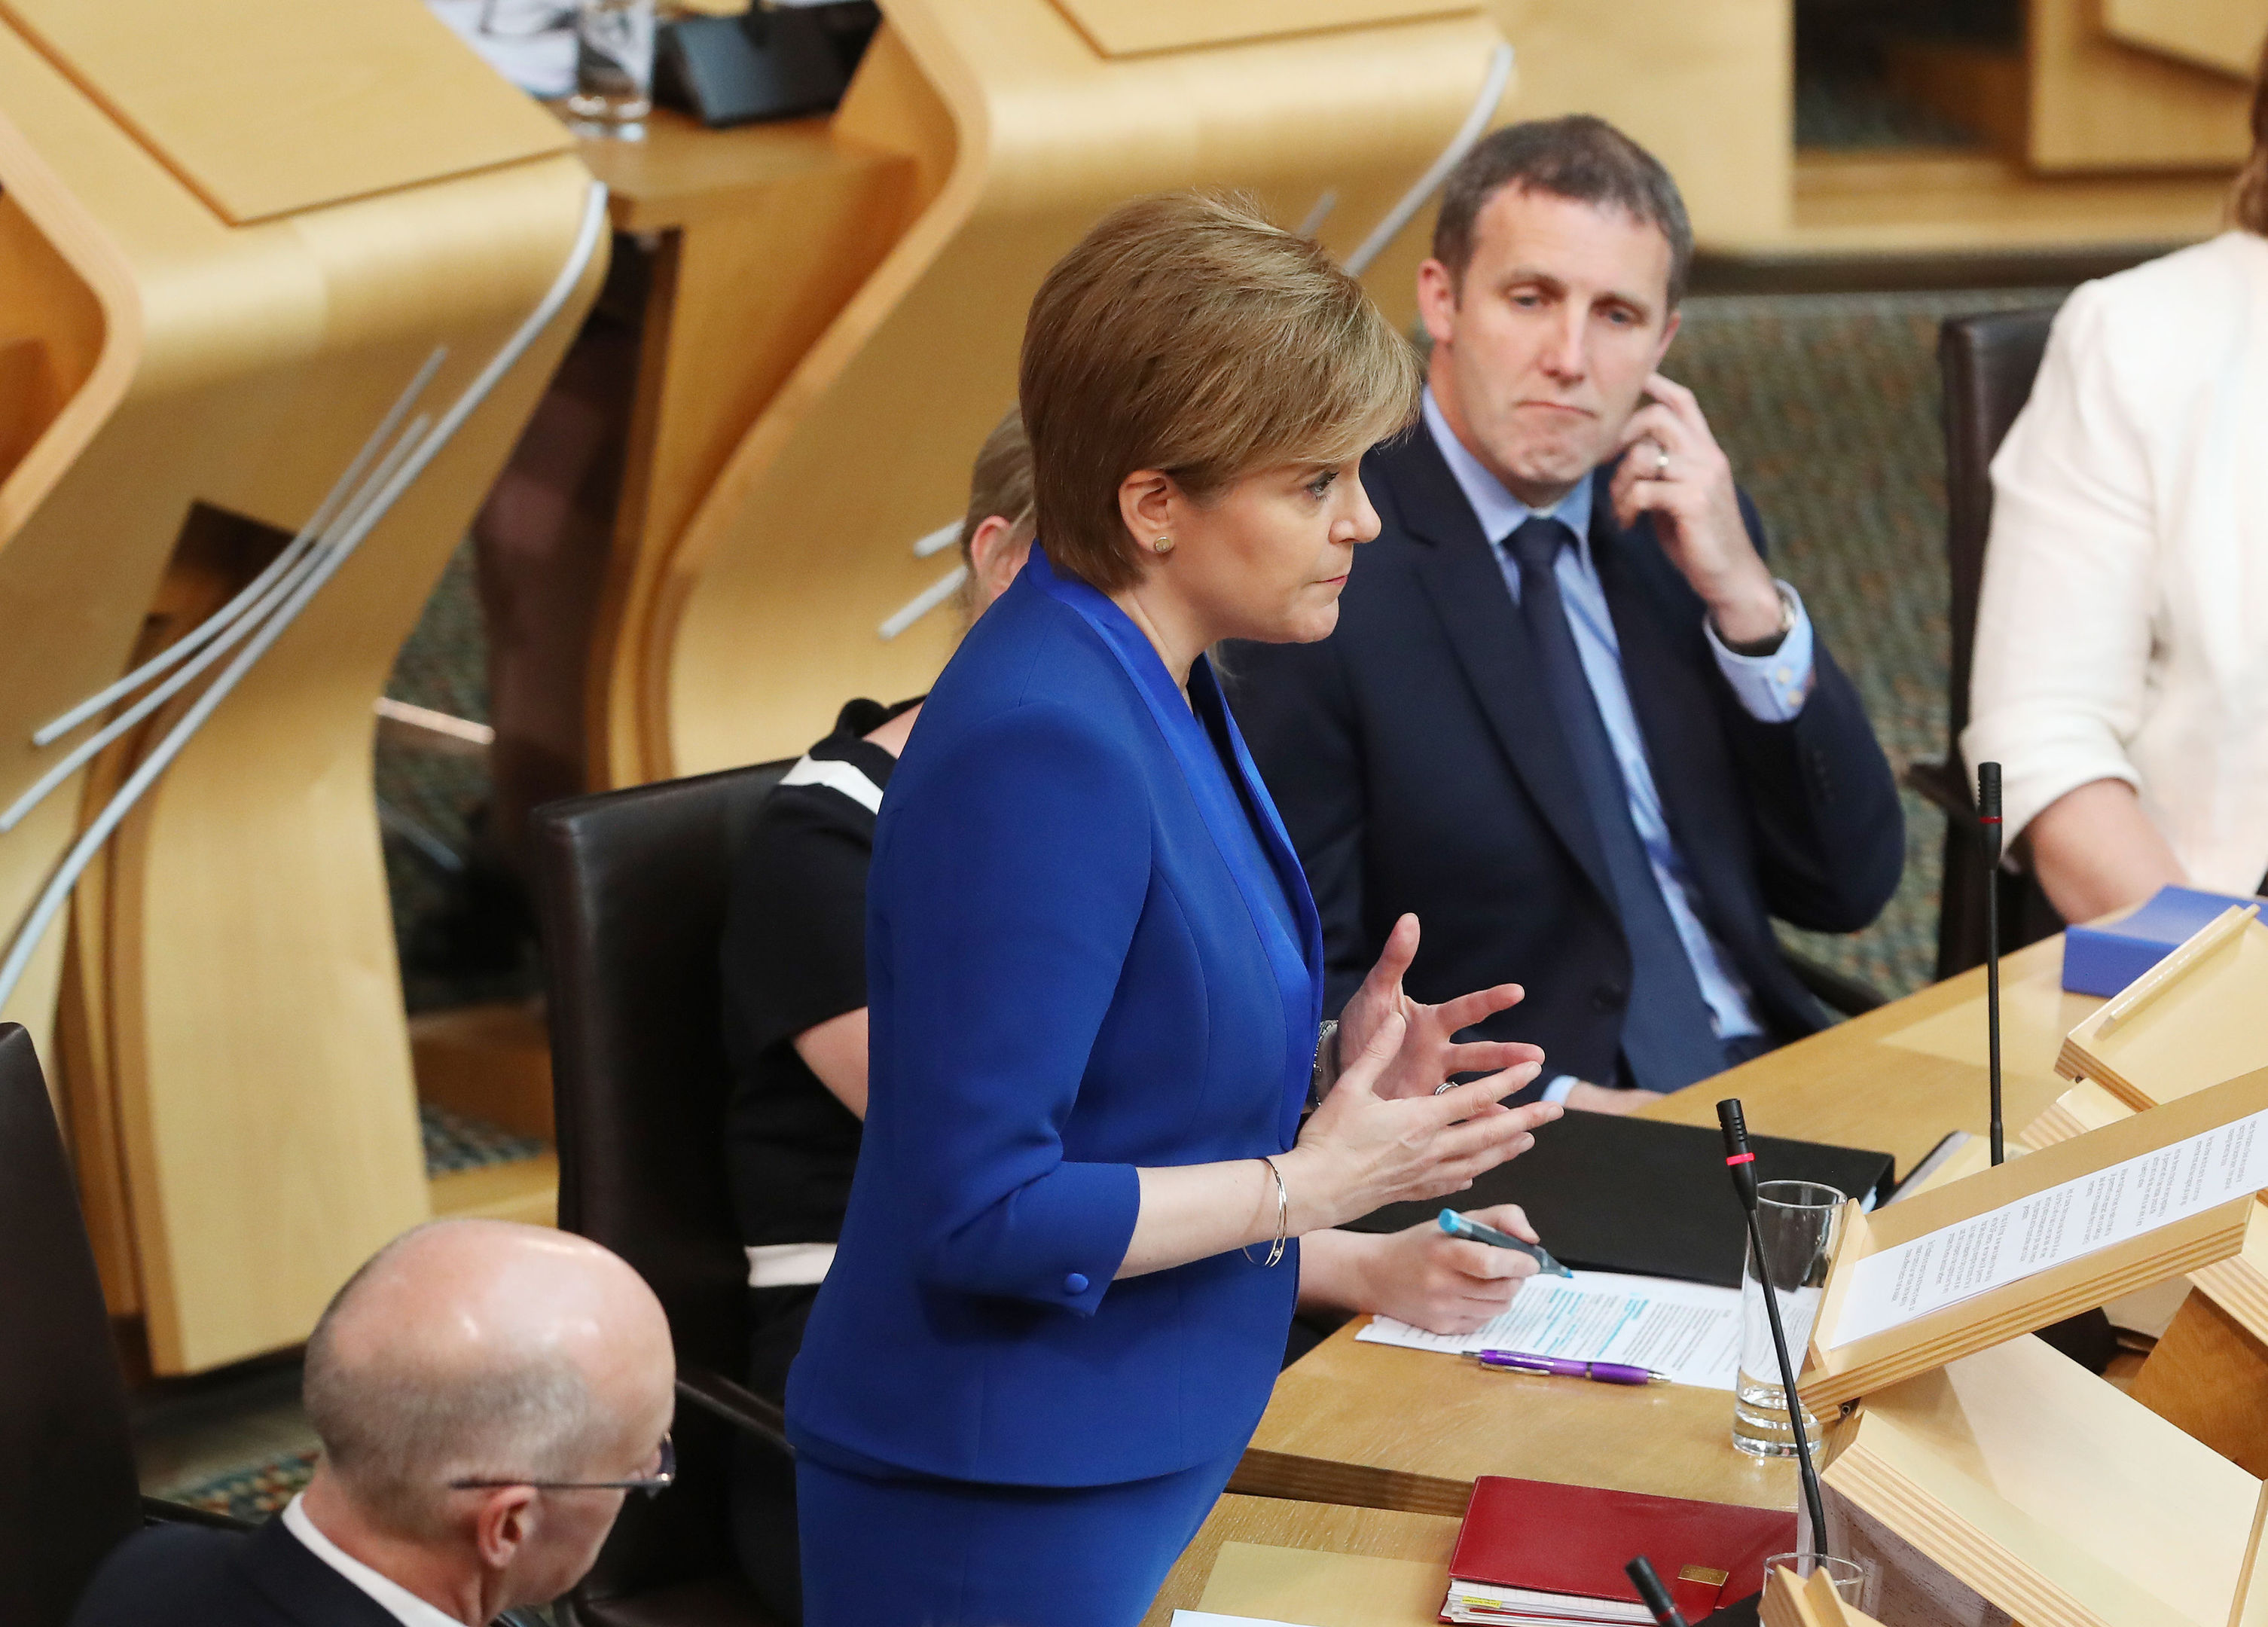 The First Minister has been reflecting on her plans for a second vote following the General Election.